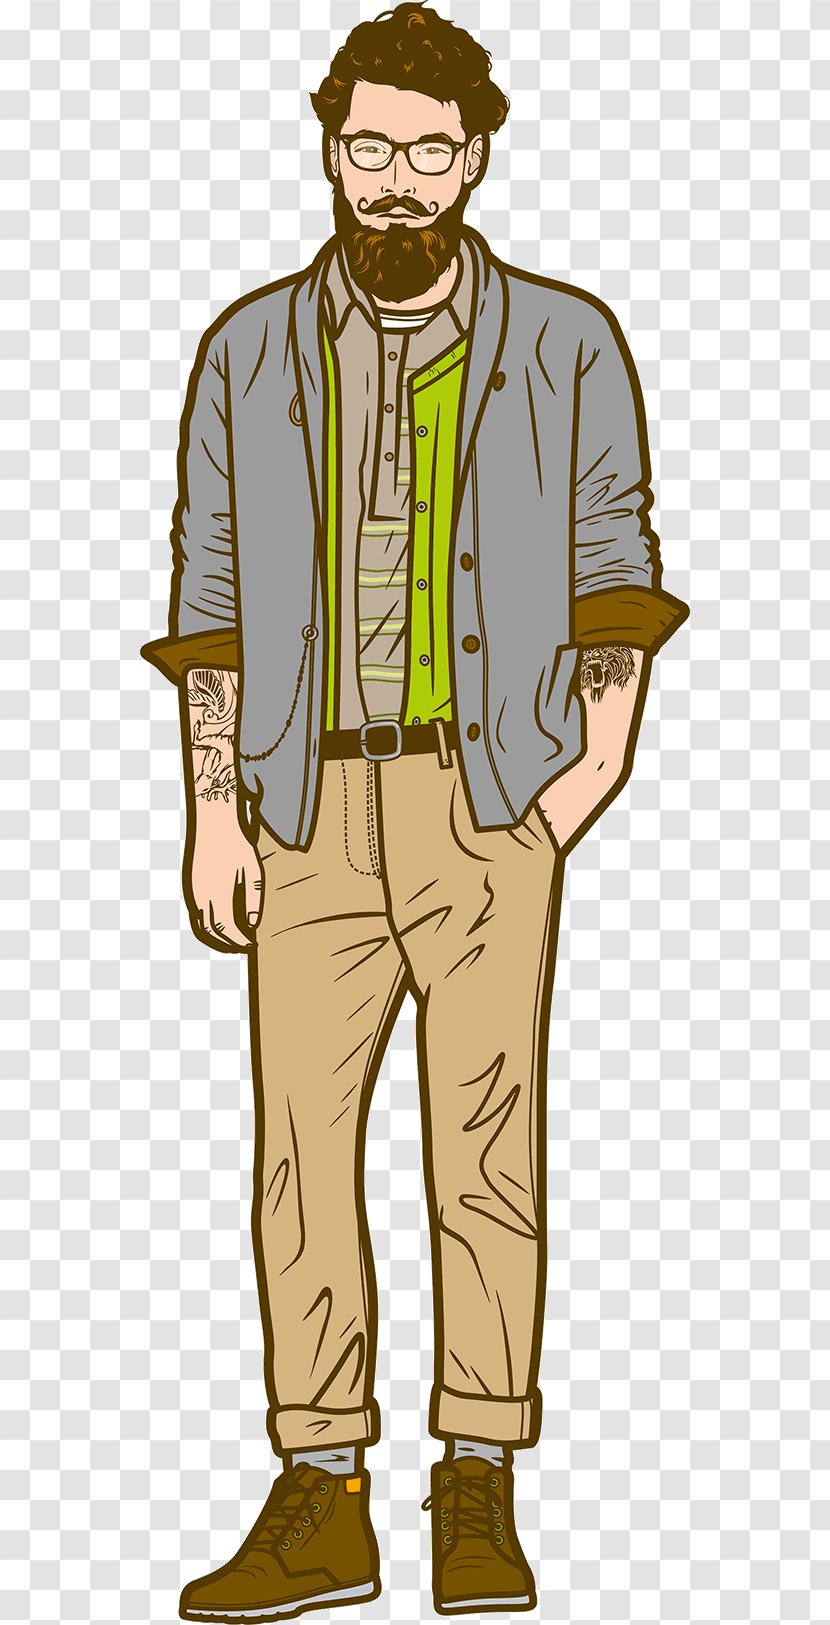 Illustration Character Fiction Cartoon - Independent Music - Illustrated Transparent PNG